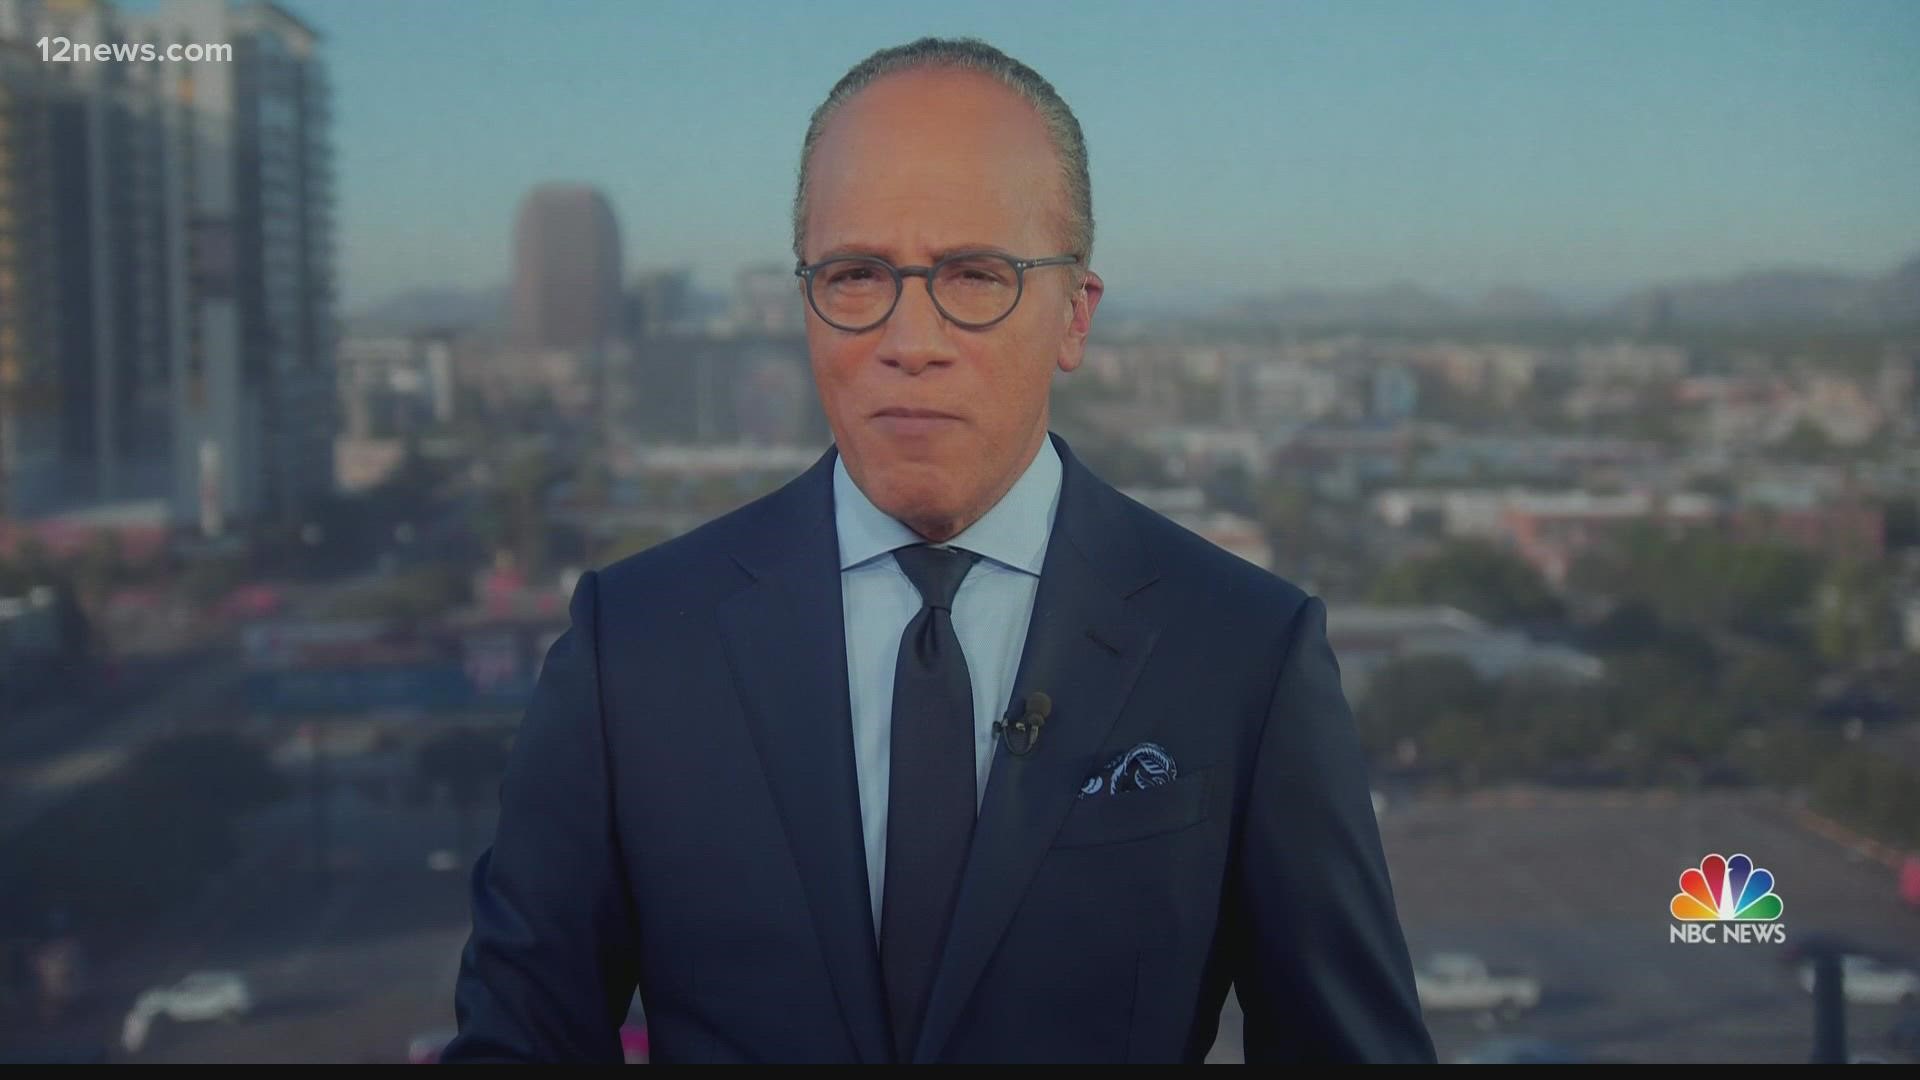 Lester Holt gives his opinion on covering elections after the 2022 midterm elections.